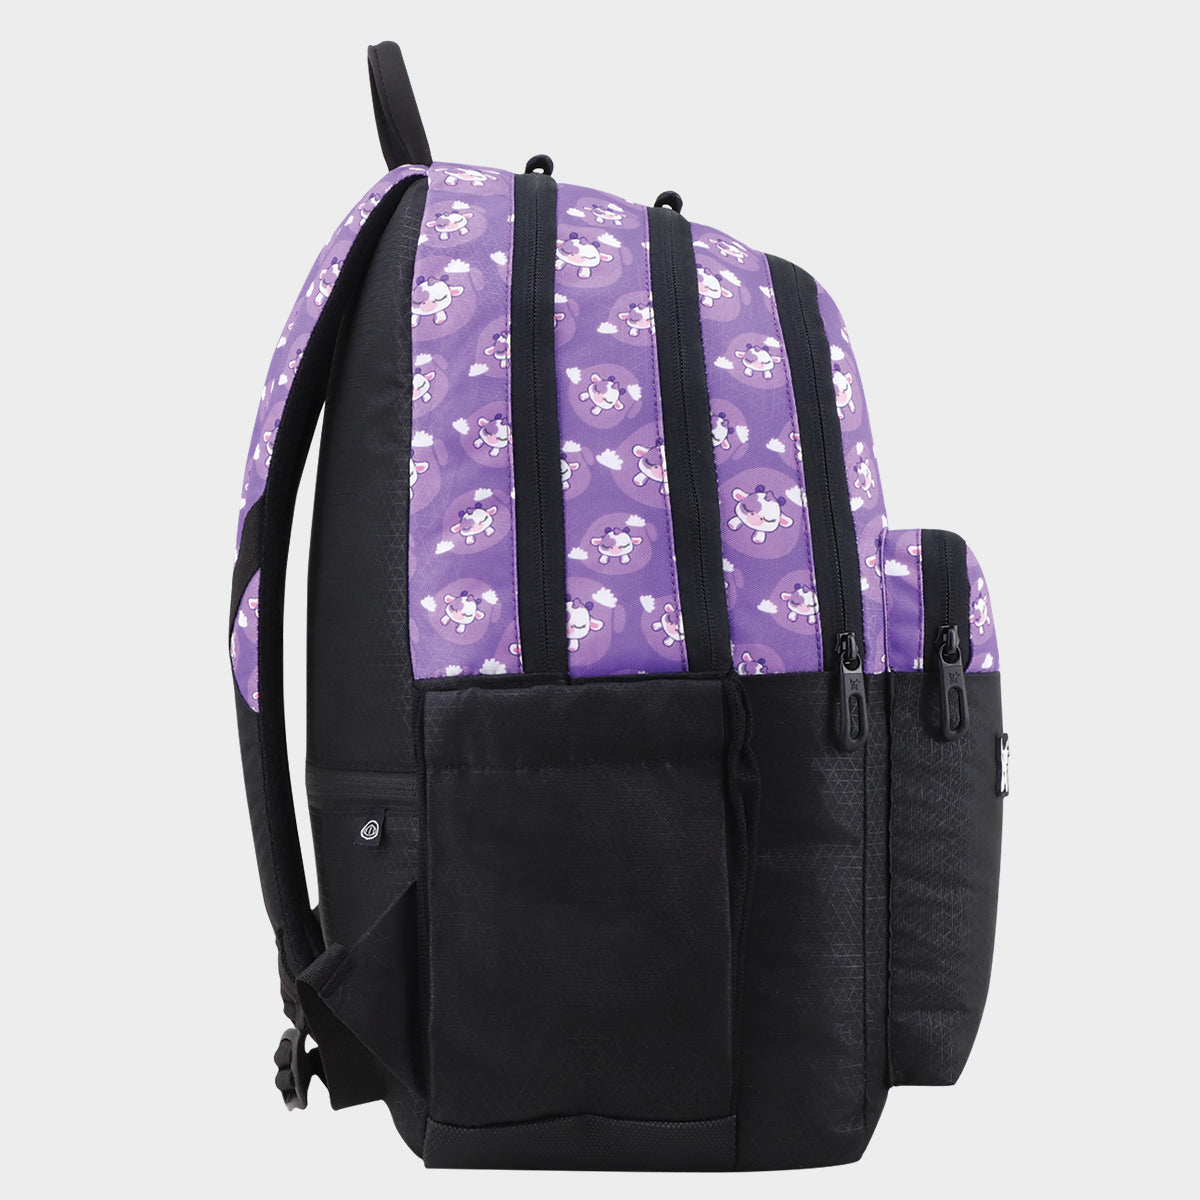 Arctic Fox School Bag and Kids Backpack for Girls and Boys Silly Calf Lavender